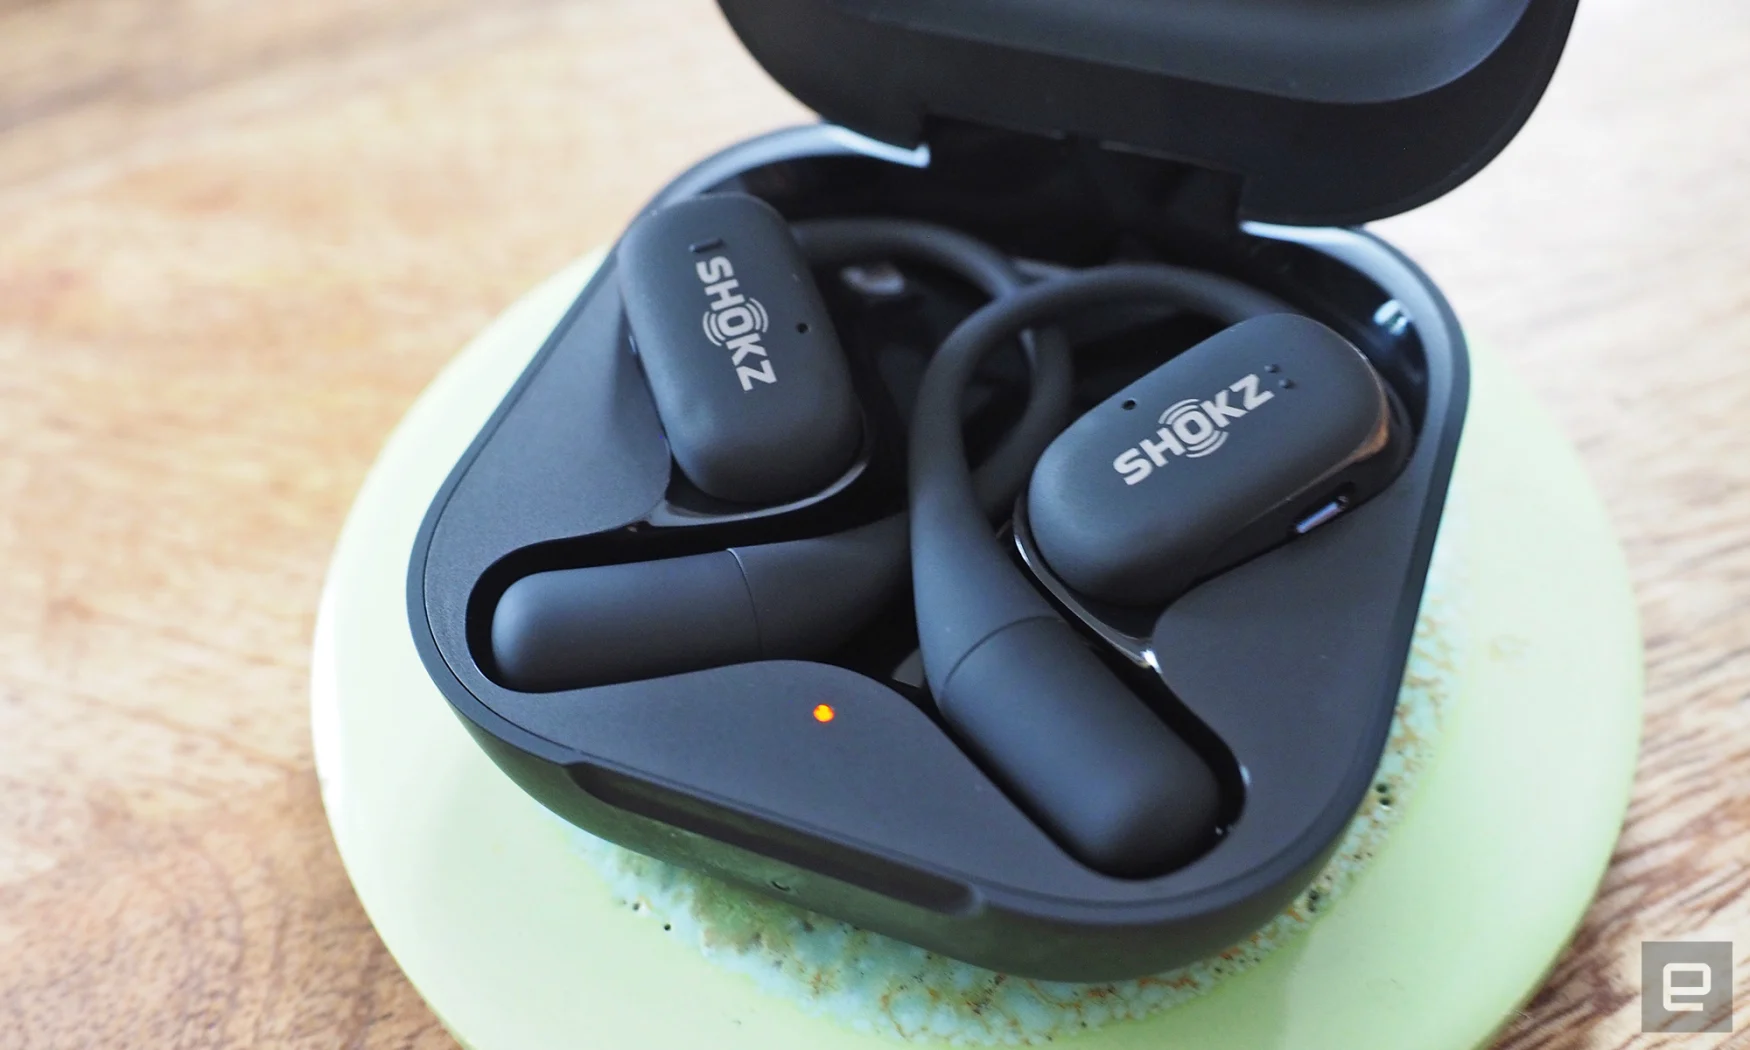 Close-up images of the Shokz OpenFit open-back headphones in gray with the charging case.